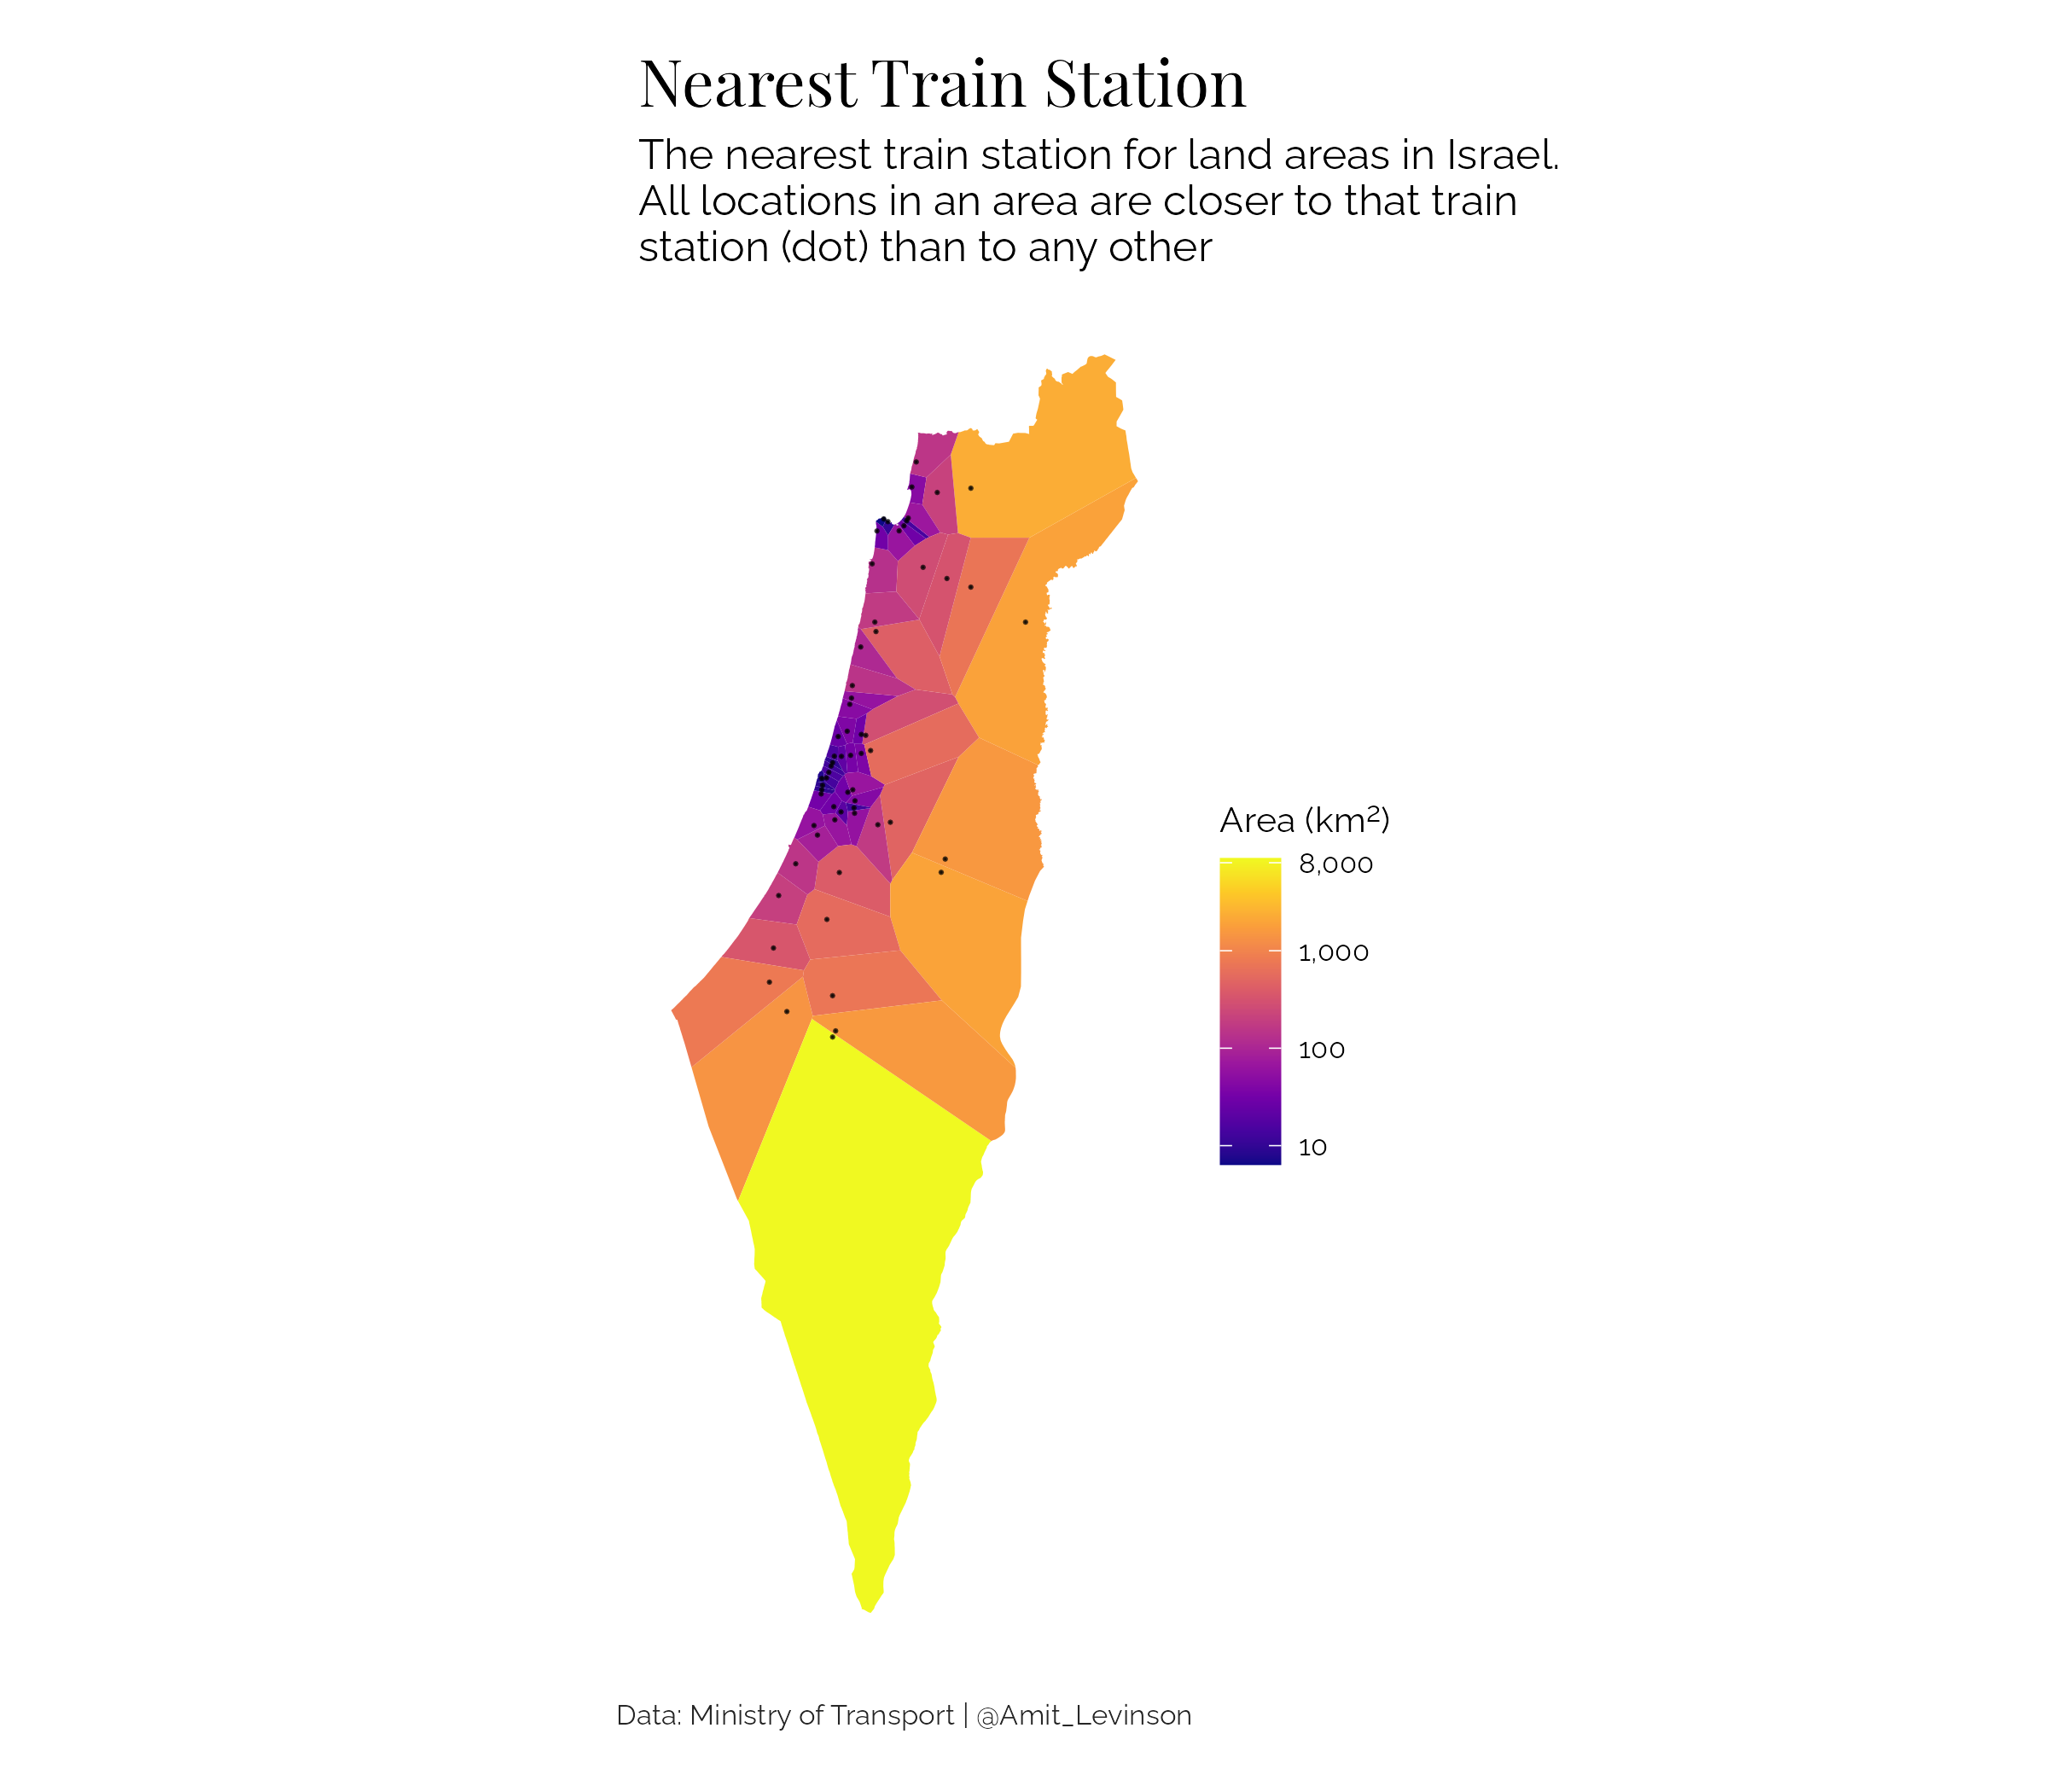 Map of Israel split to voronoi diagrams with the nearest train station as seeds.